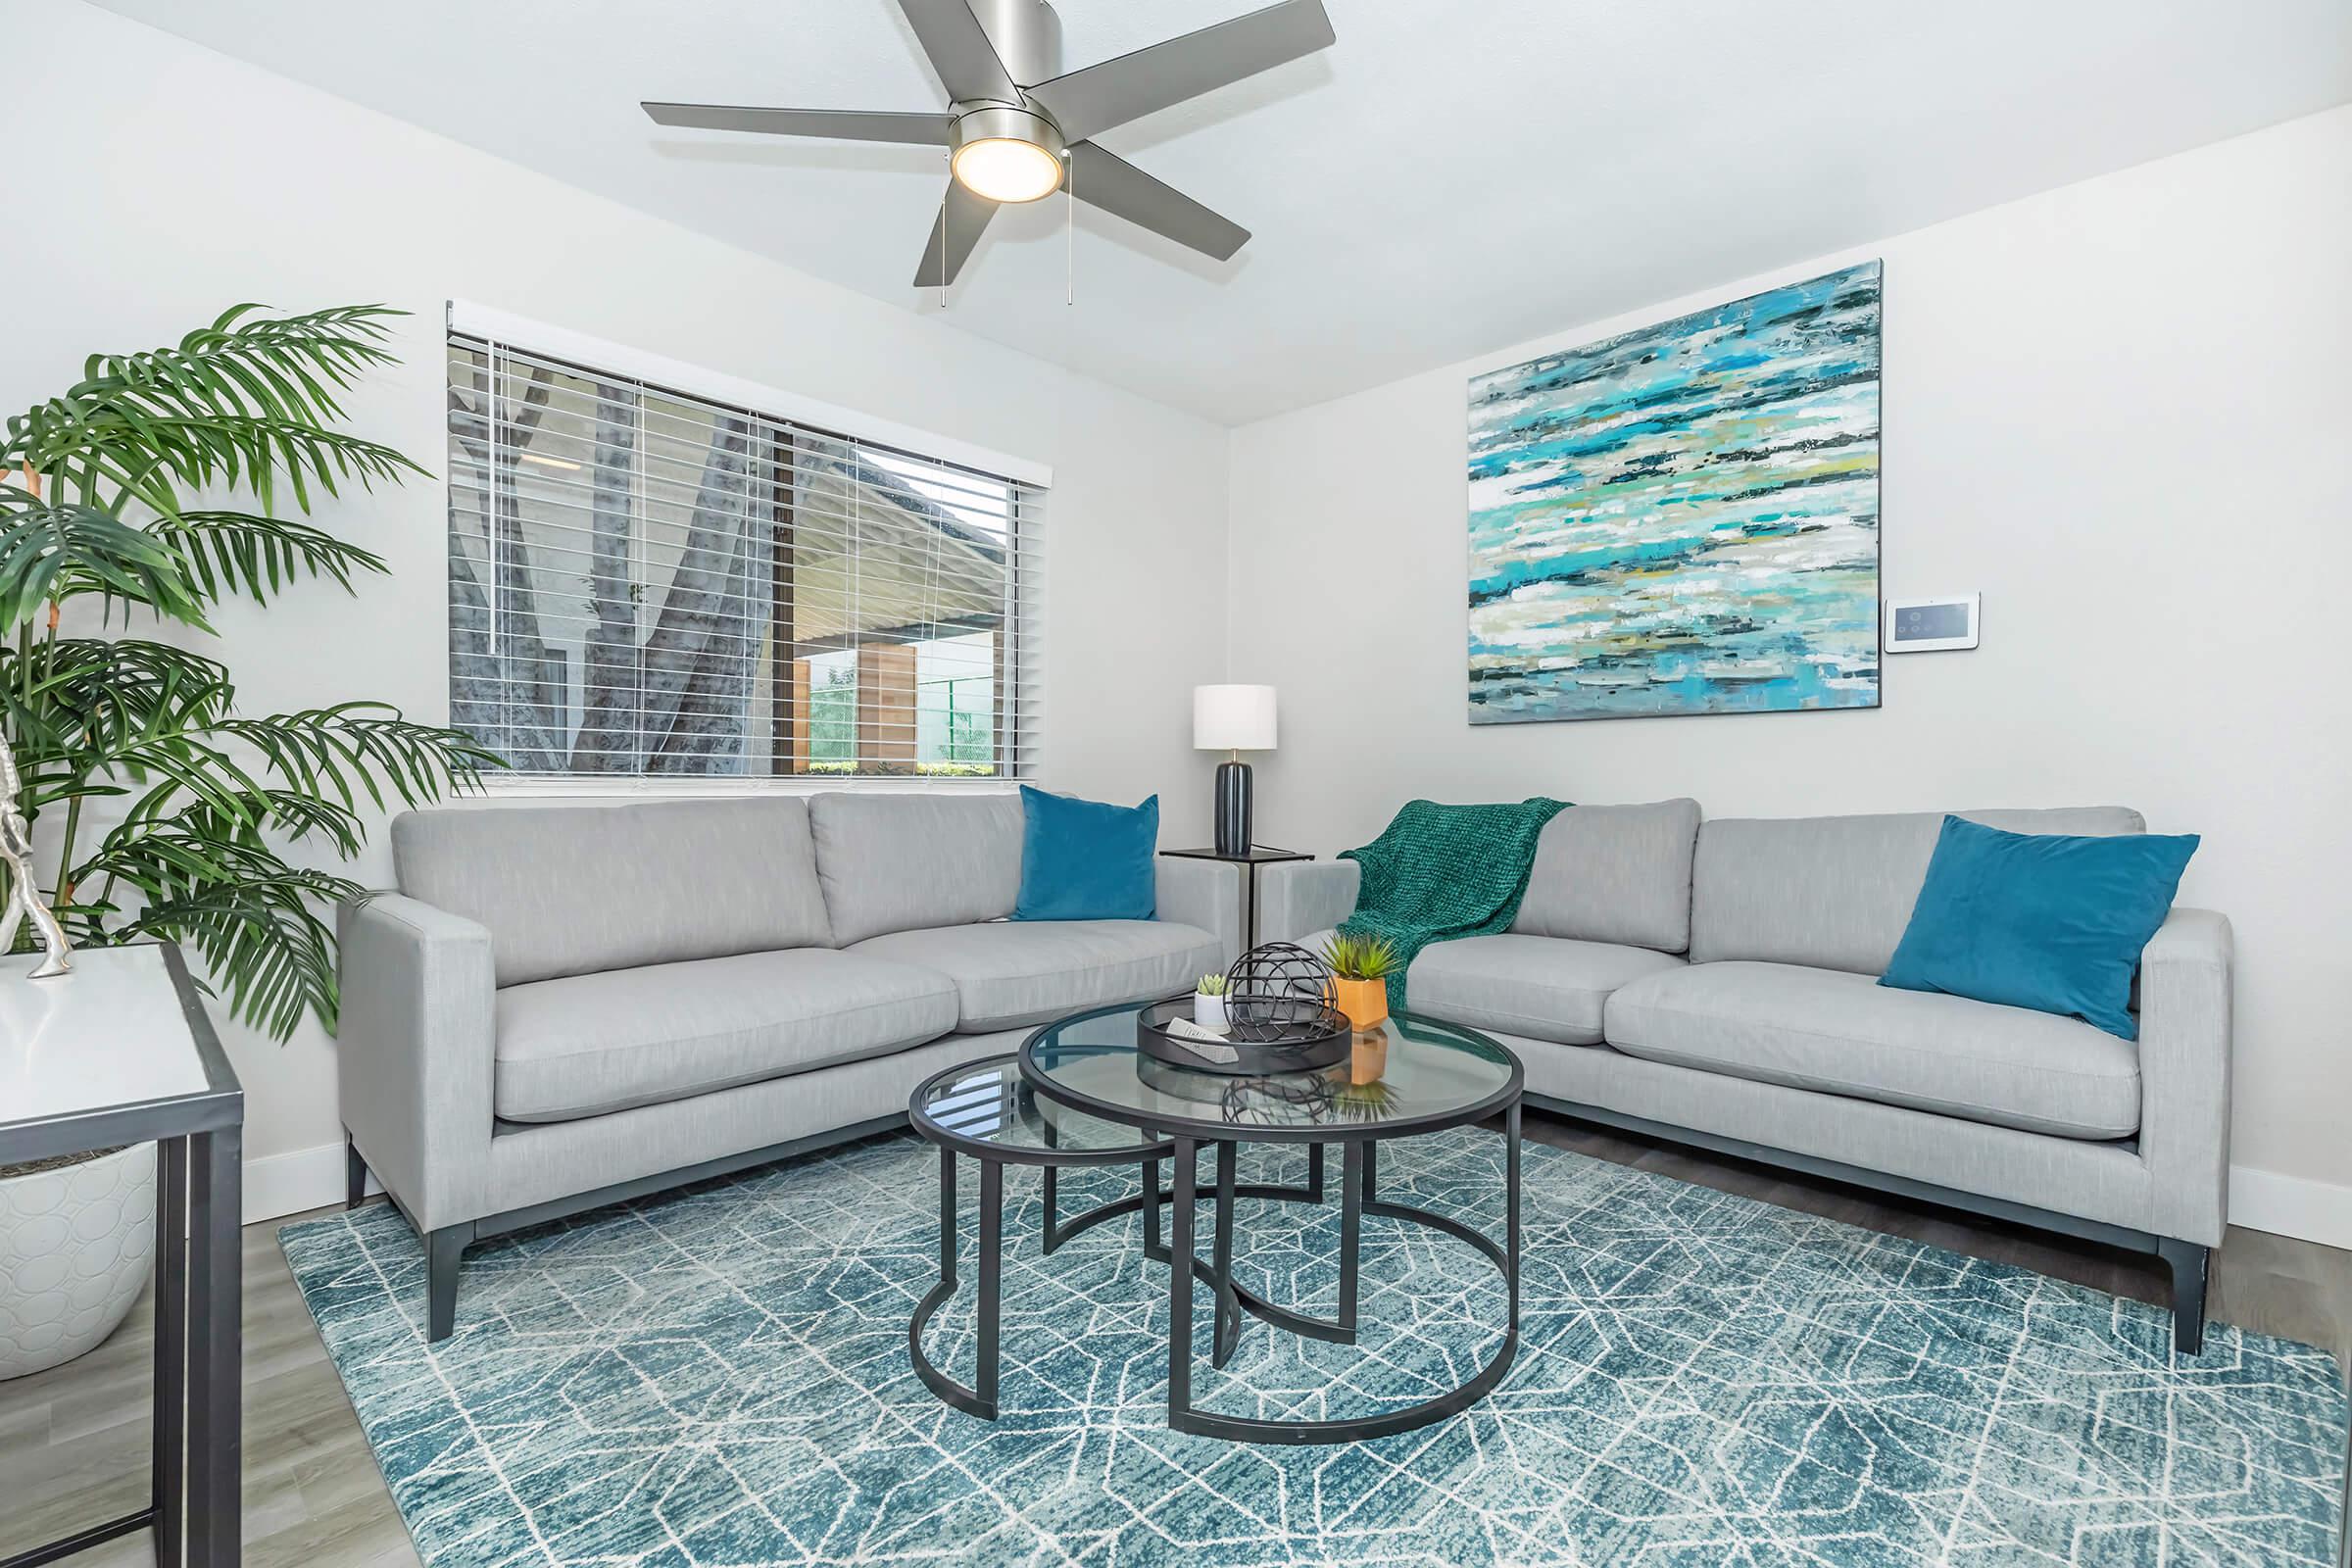 Phoenix, AZ Luxury Apartments For Rent - Tides on 71st - Blue-Themed Living Room with Couches, Painting, Window, and Ceiling Fan